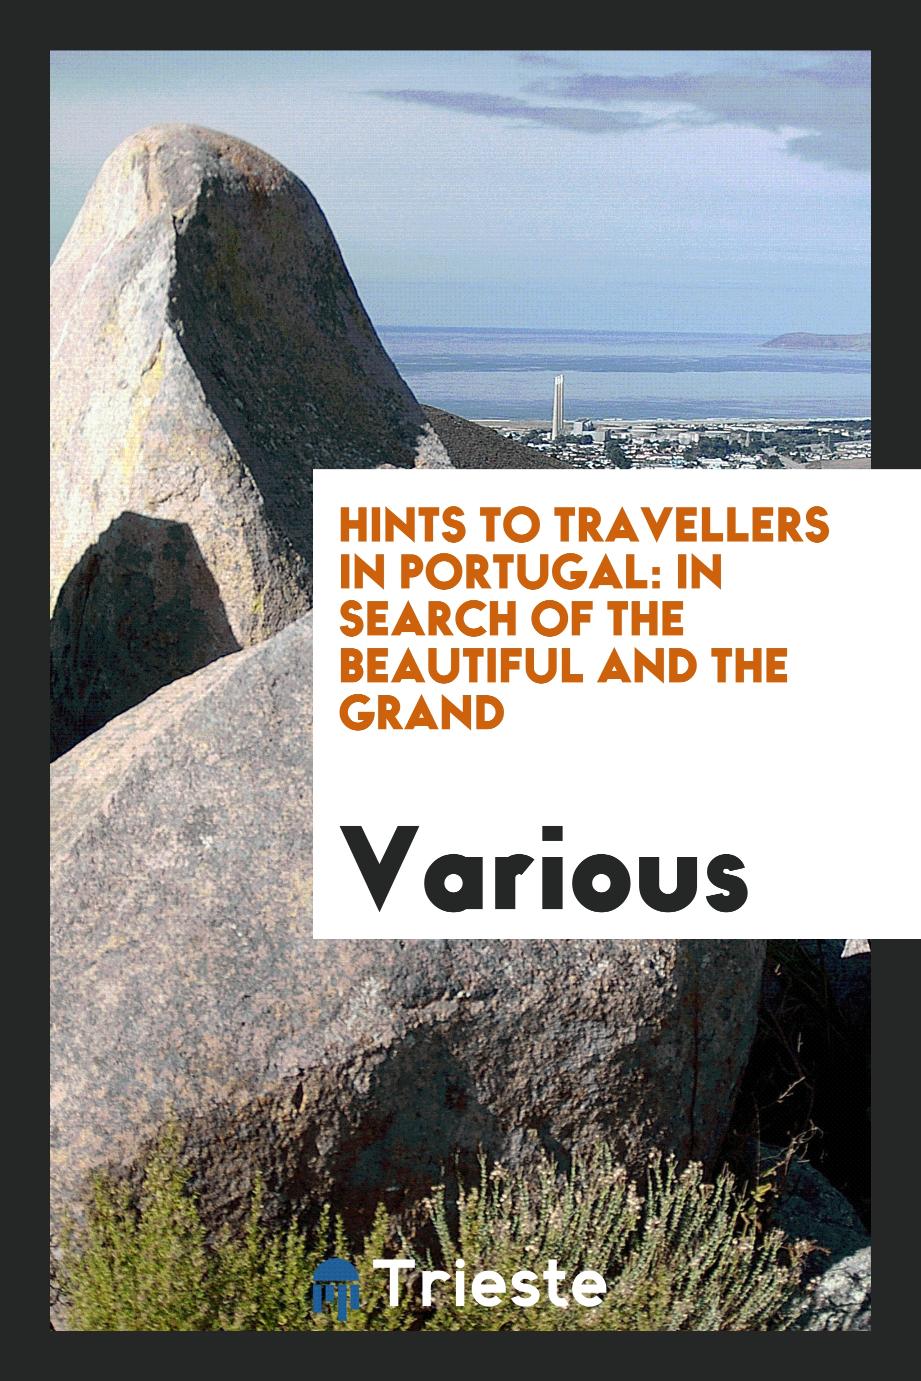 Hints to travellers in Portugal: In Search of the Beautiful and the Grand